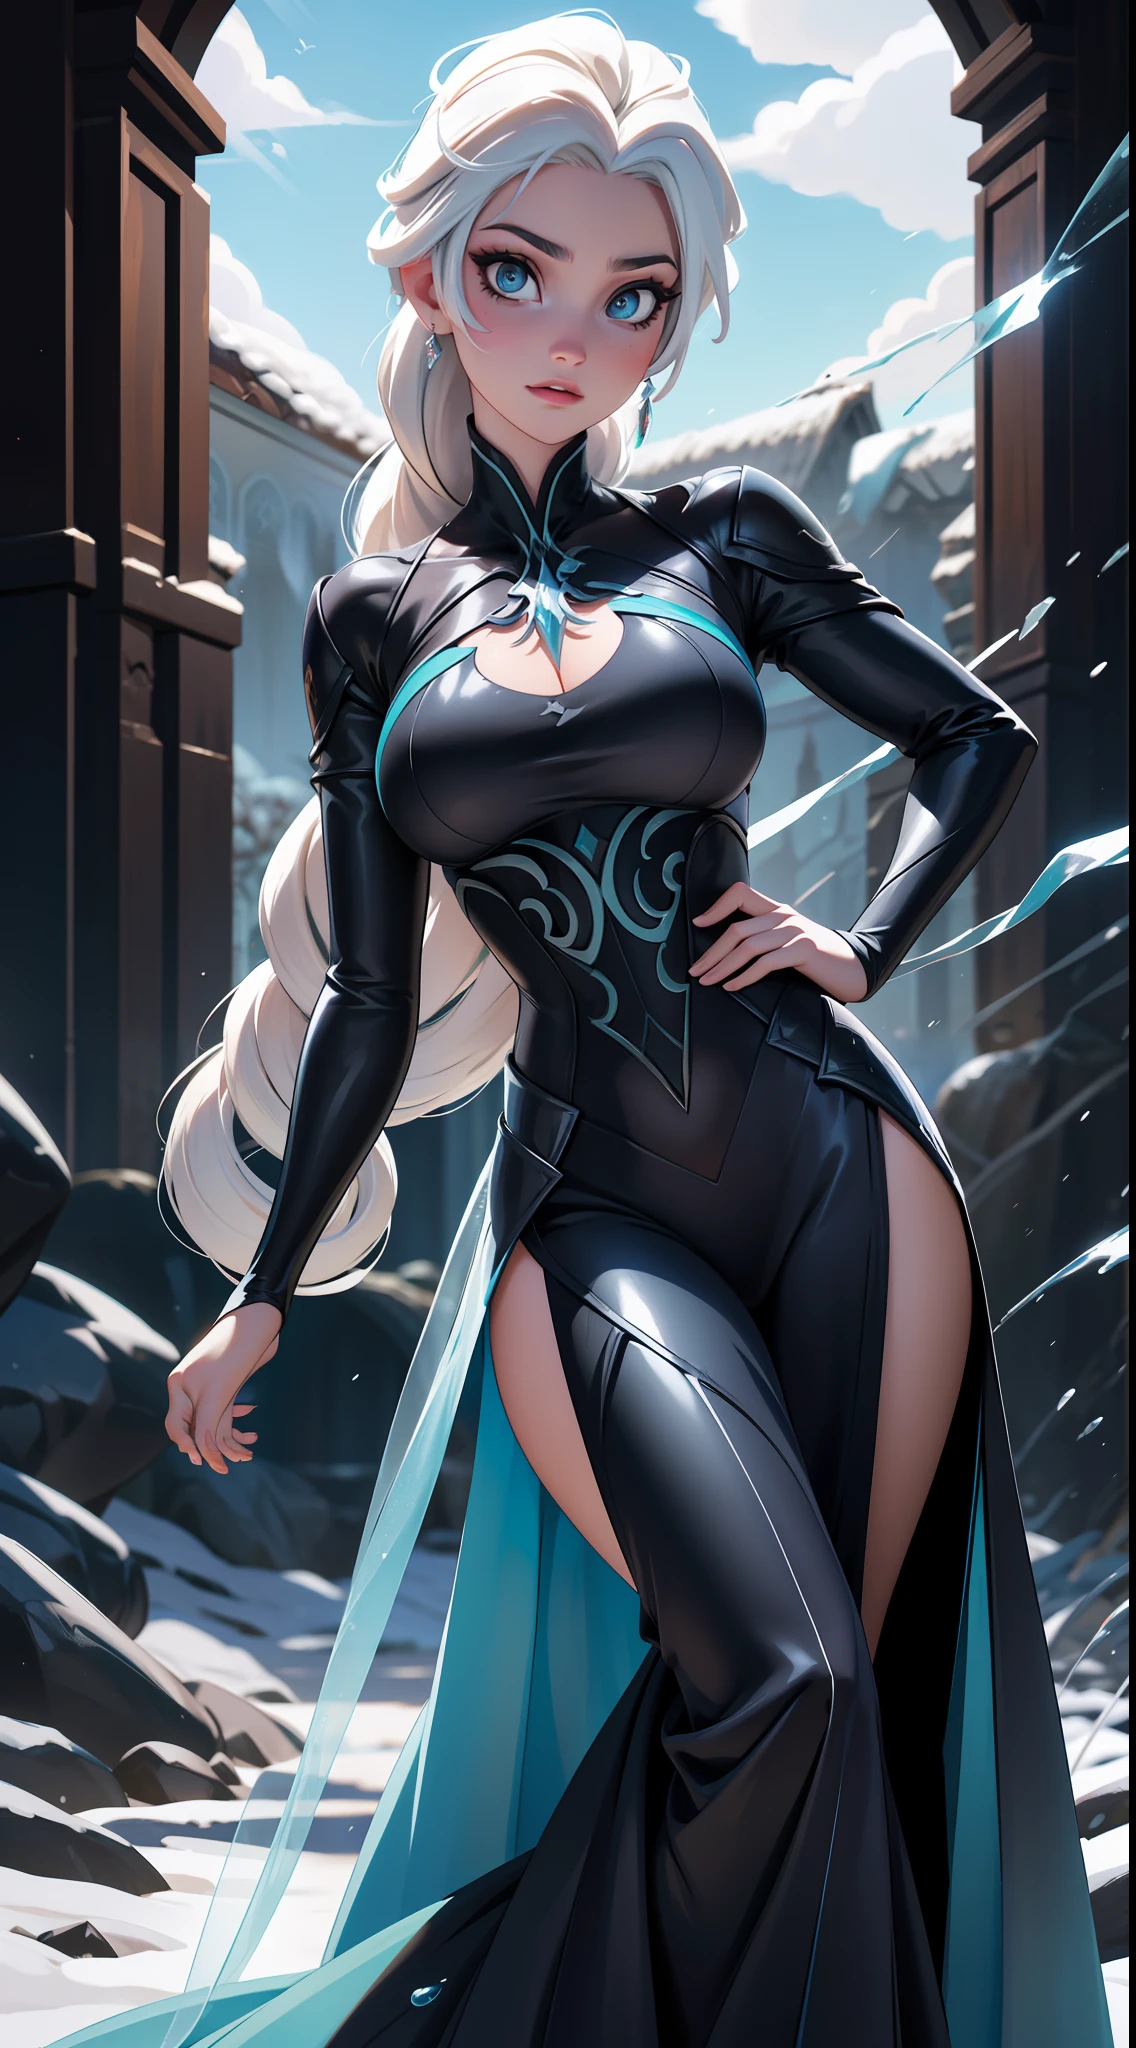 Elsa-Venom Fusion, Merging models, Elsa&#39;s white hair, Venom clothes, ice particles, melting, 1girl, Beautiful, (master part:1.2), (best qualityer:1.2), ((struggling pose)), ((field of battle)), cinemactic, perfects eyes, perfect  skin, perfect lighting, sorrido, Lumiere, Farbe, texturized skin, detail, Beauthfull, wonder wonder wonder wonder wonder wonder wonder wonder wonder wonder wonder wonder wonder wonder wonder wonder wonder wonder wonder wonder wonder wonder wonder wonder wonder wonder wonder wonder wonder wonder wonder wonder, ultra detali, face perfect